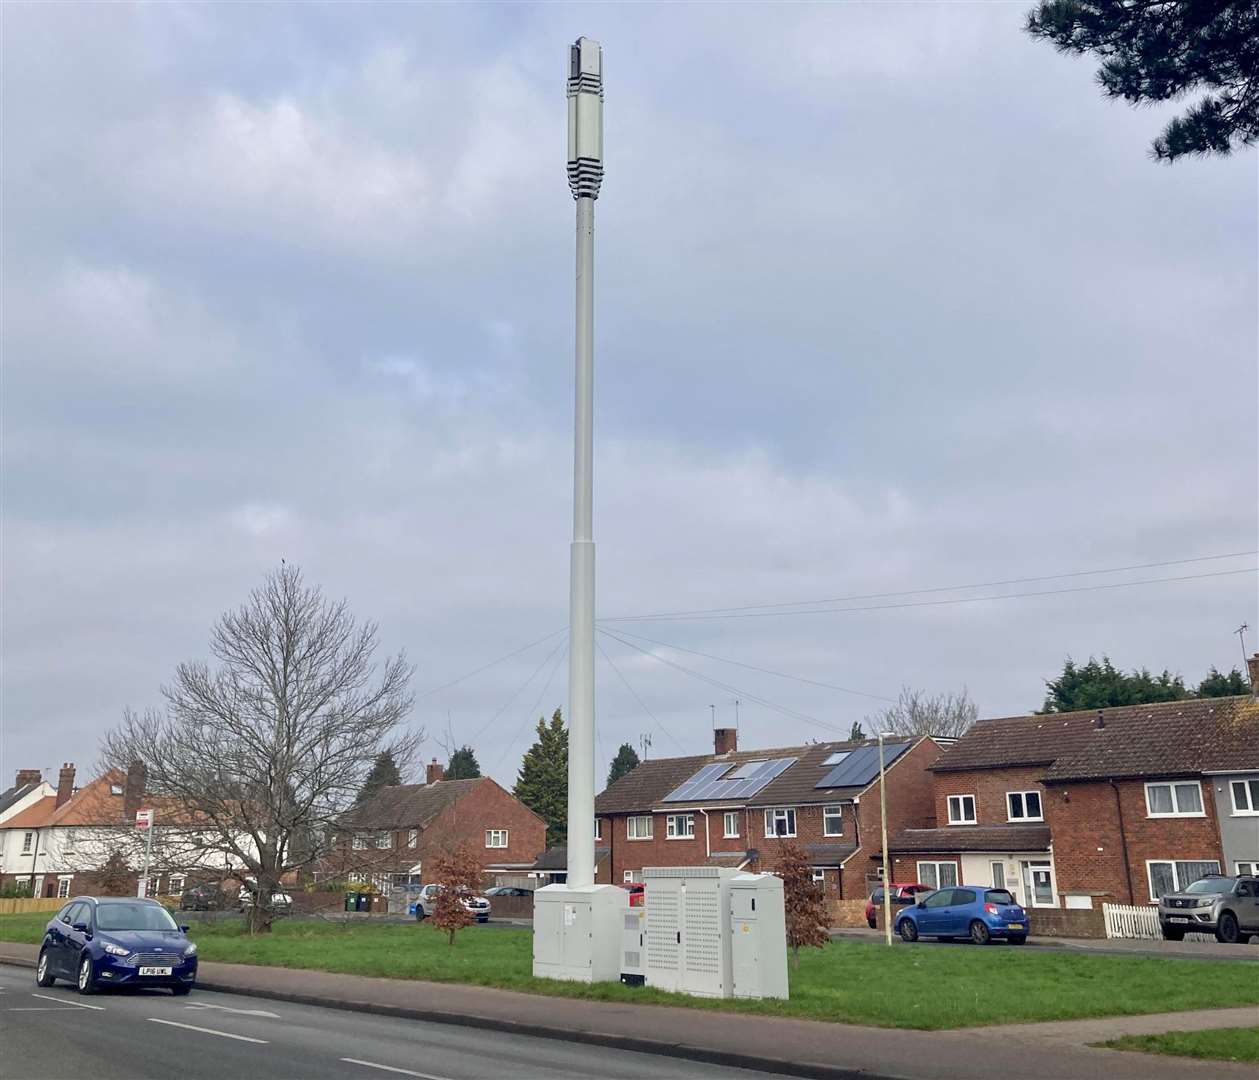 A 5G mast identical to the one proposed for Smarden has already been installed in Sutton Road, Maidstone. Picture: Richard Hemsley